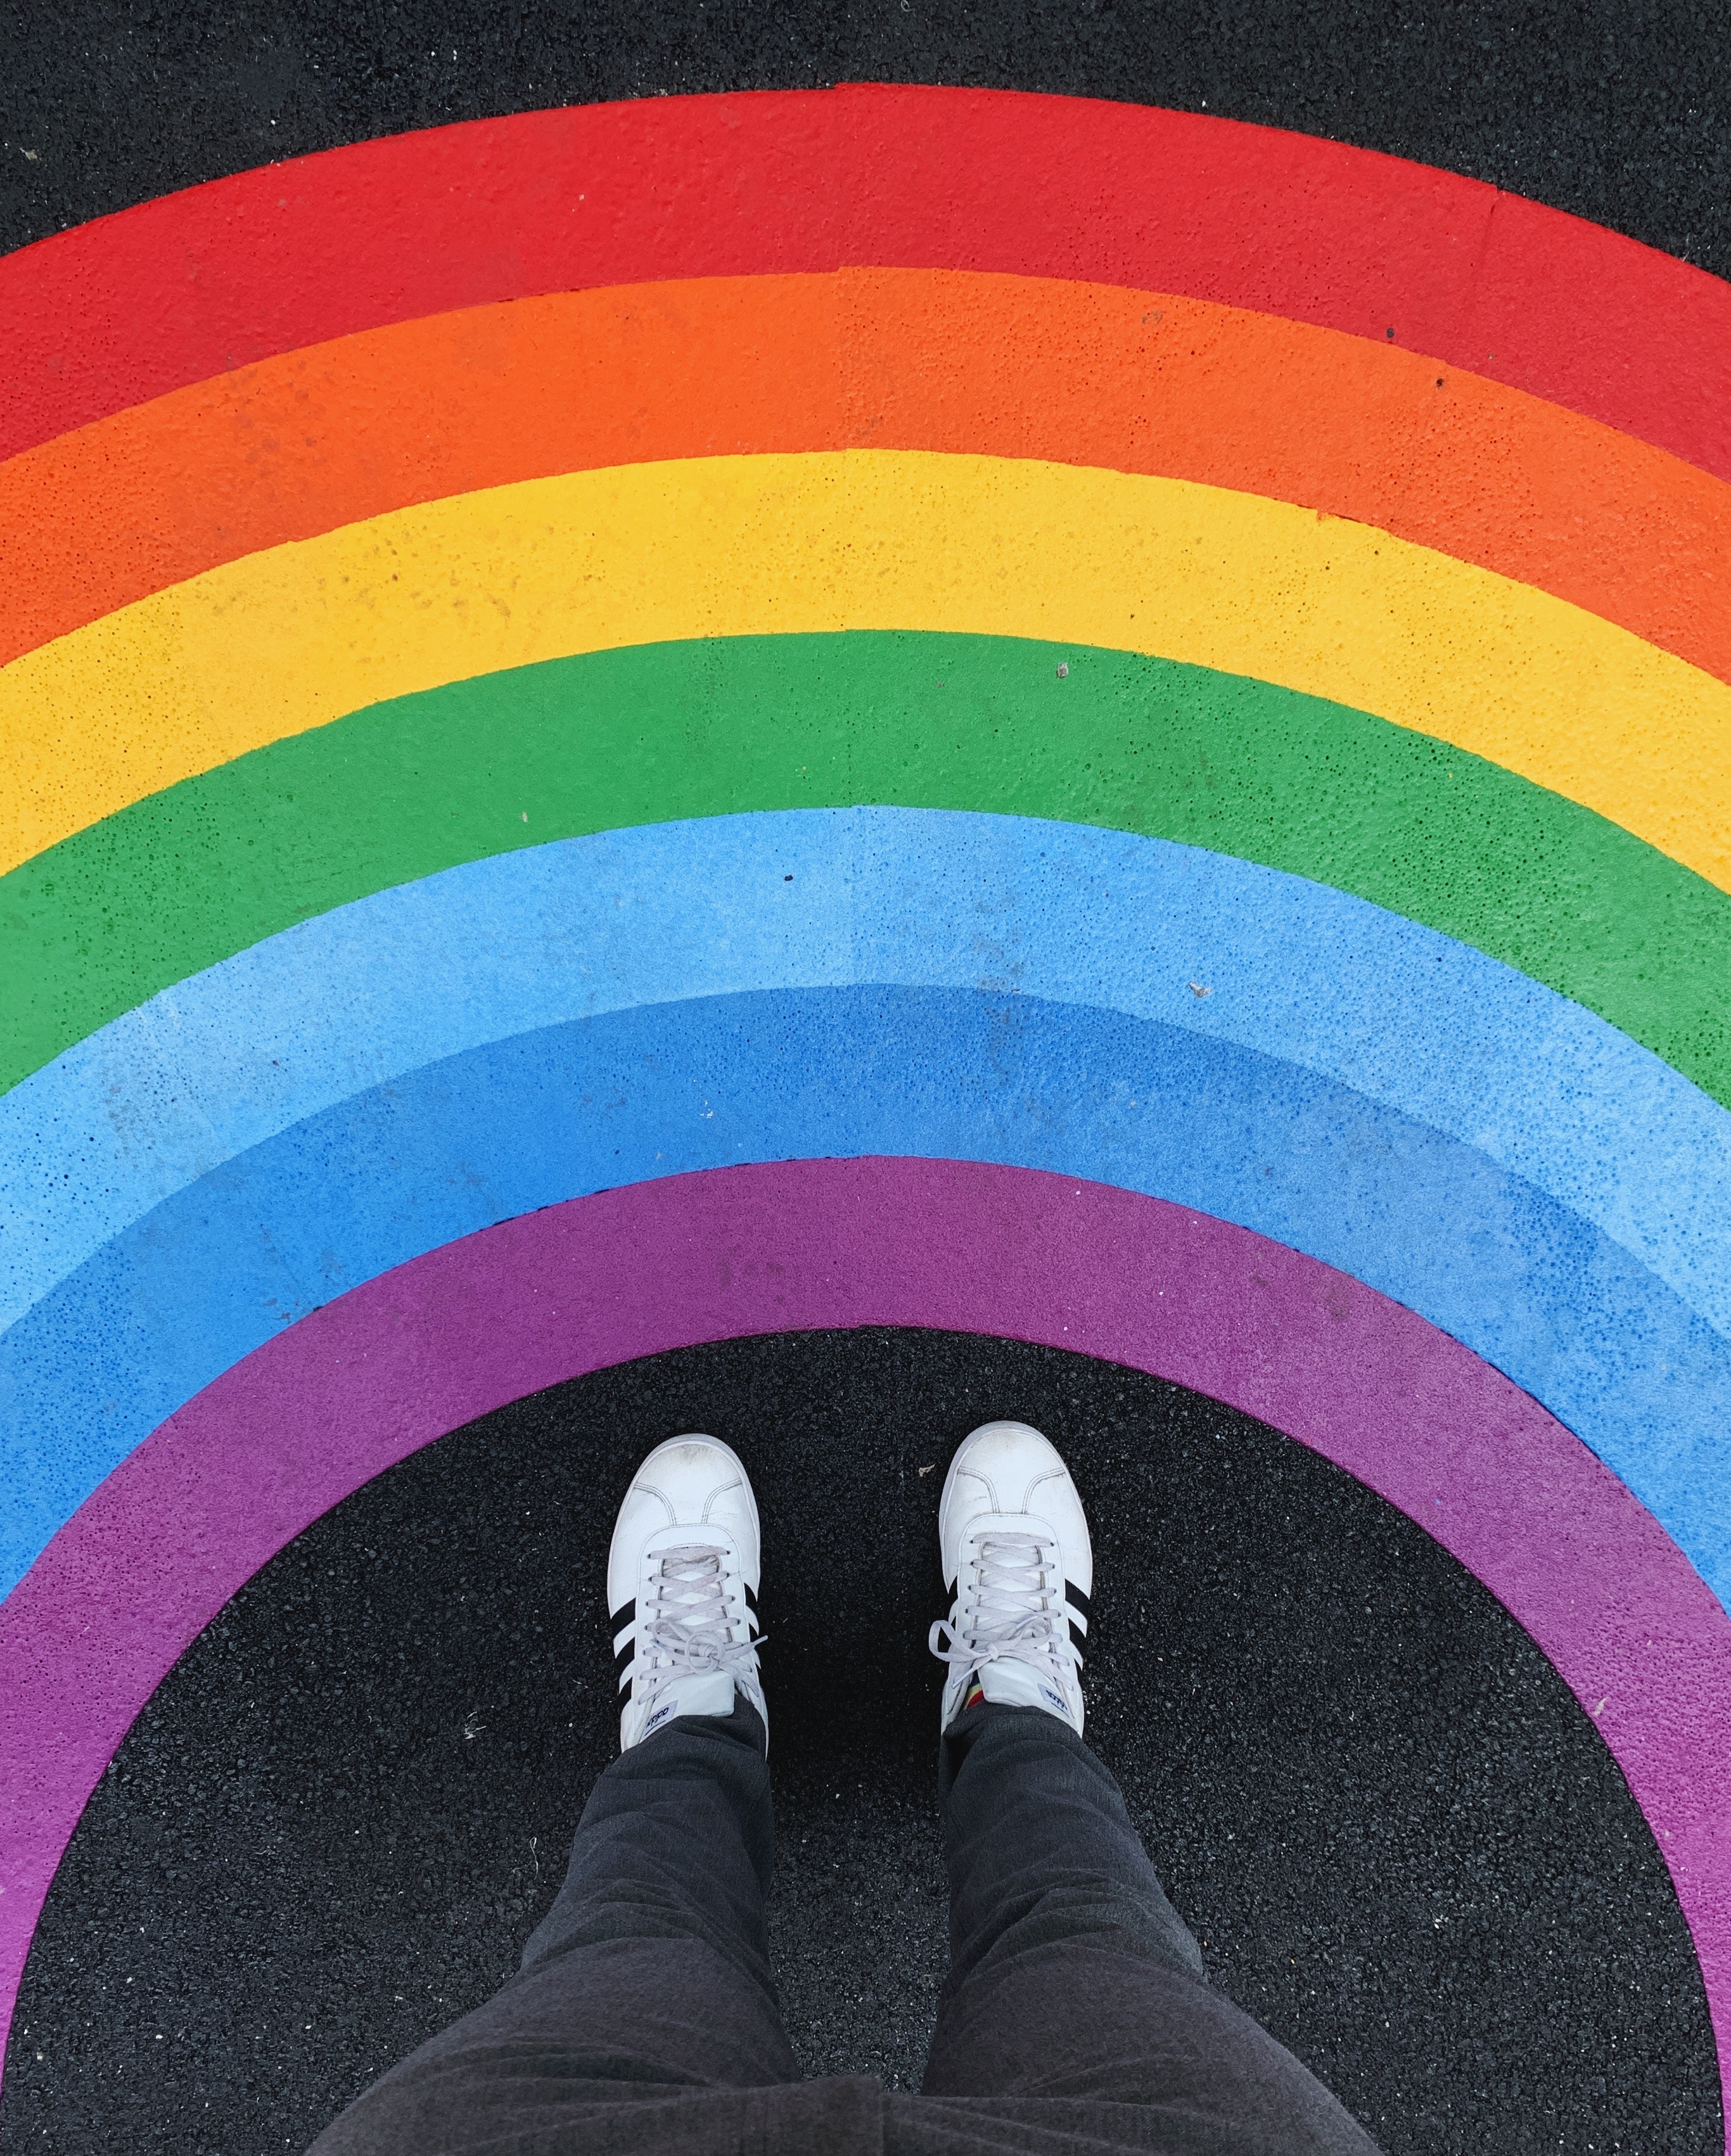 A vibrant rainbow is painted onto a road. Two feet wearing white shoes are situated at the bottom of the picture facing the rainbow